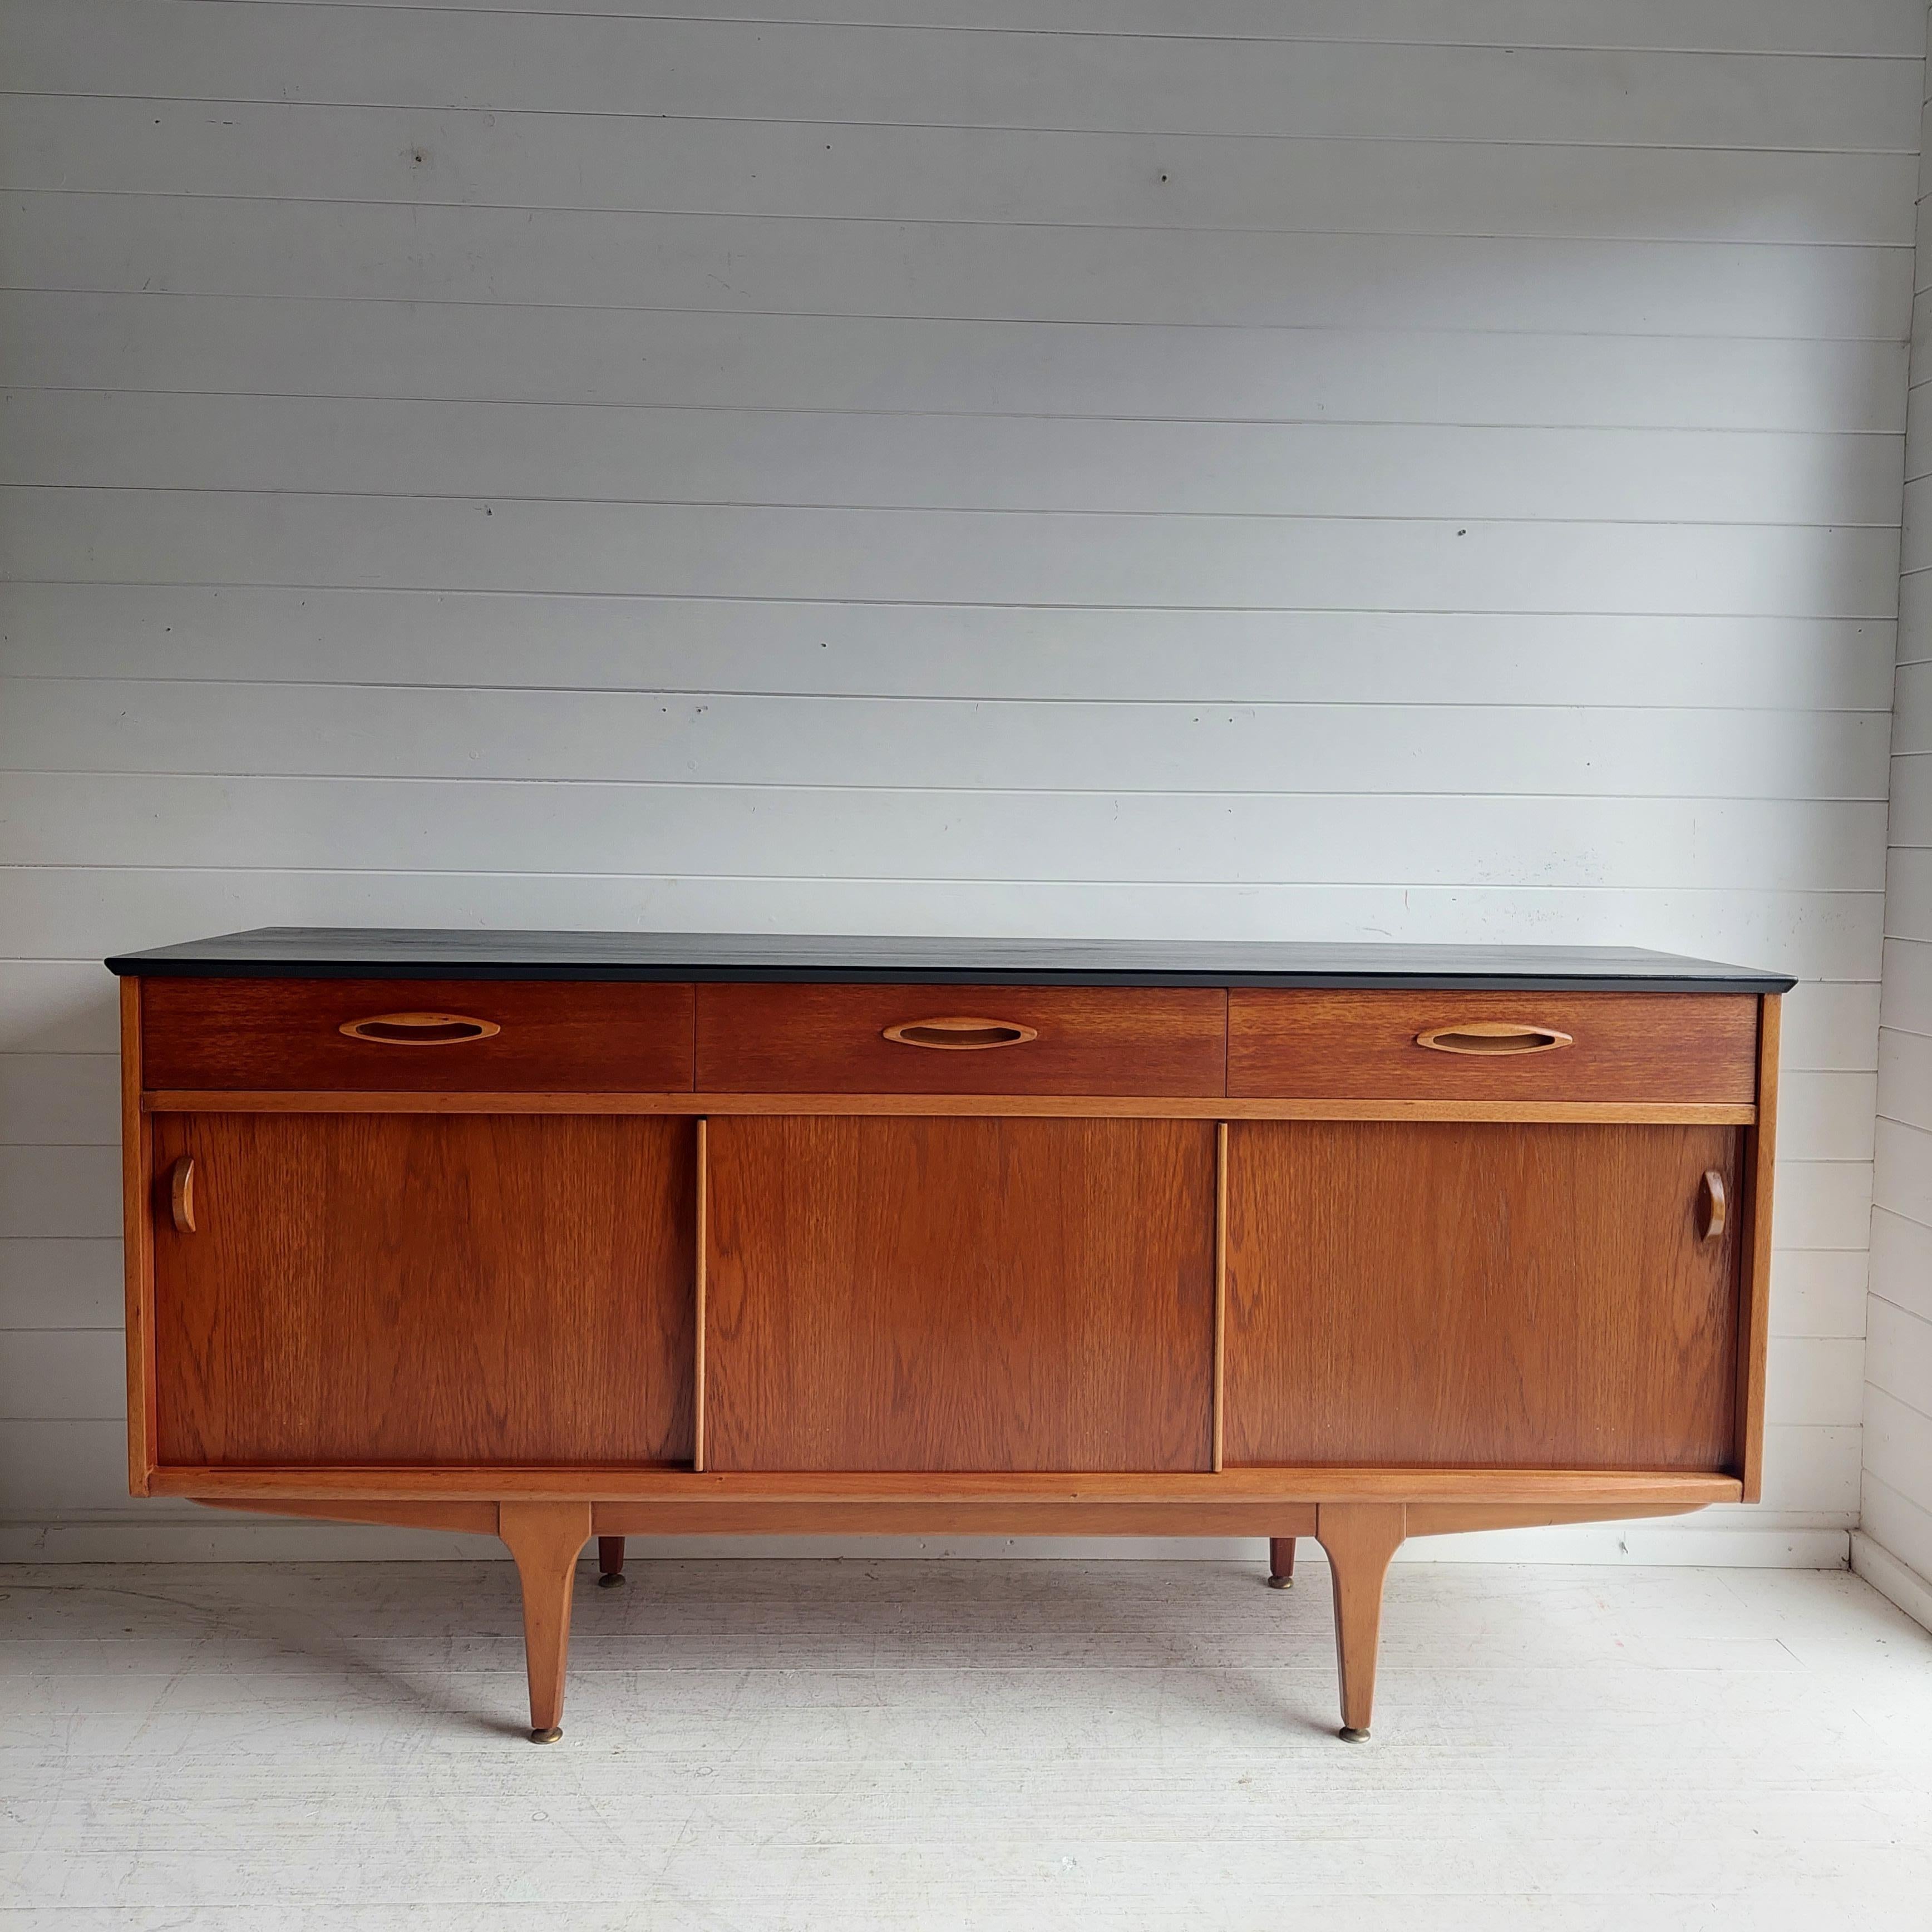 Restored 167.5cm sliding door unit for Jentique.

Rare model, teak enfilade edited by Jentique in the 1960s. 
It has three sliding doors and three drawers. 
The sliding doors reveal on the sides compartments an internal fix shelf.
The drawers have